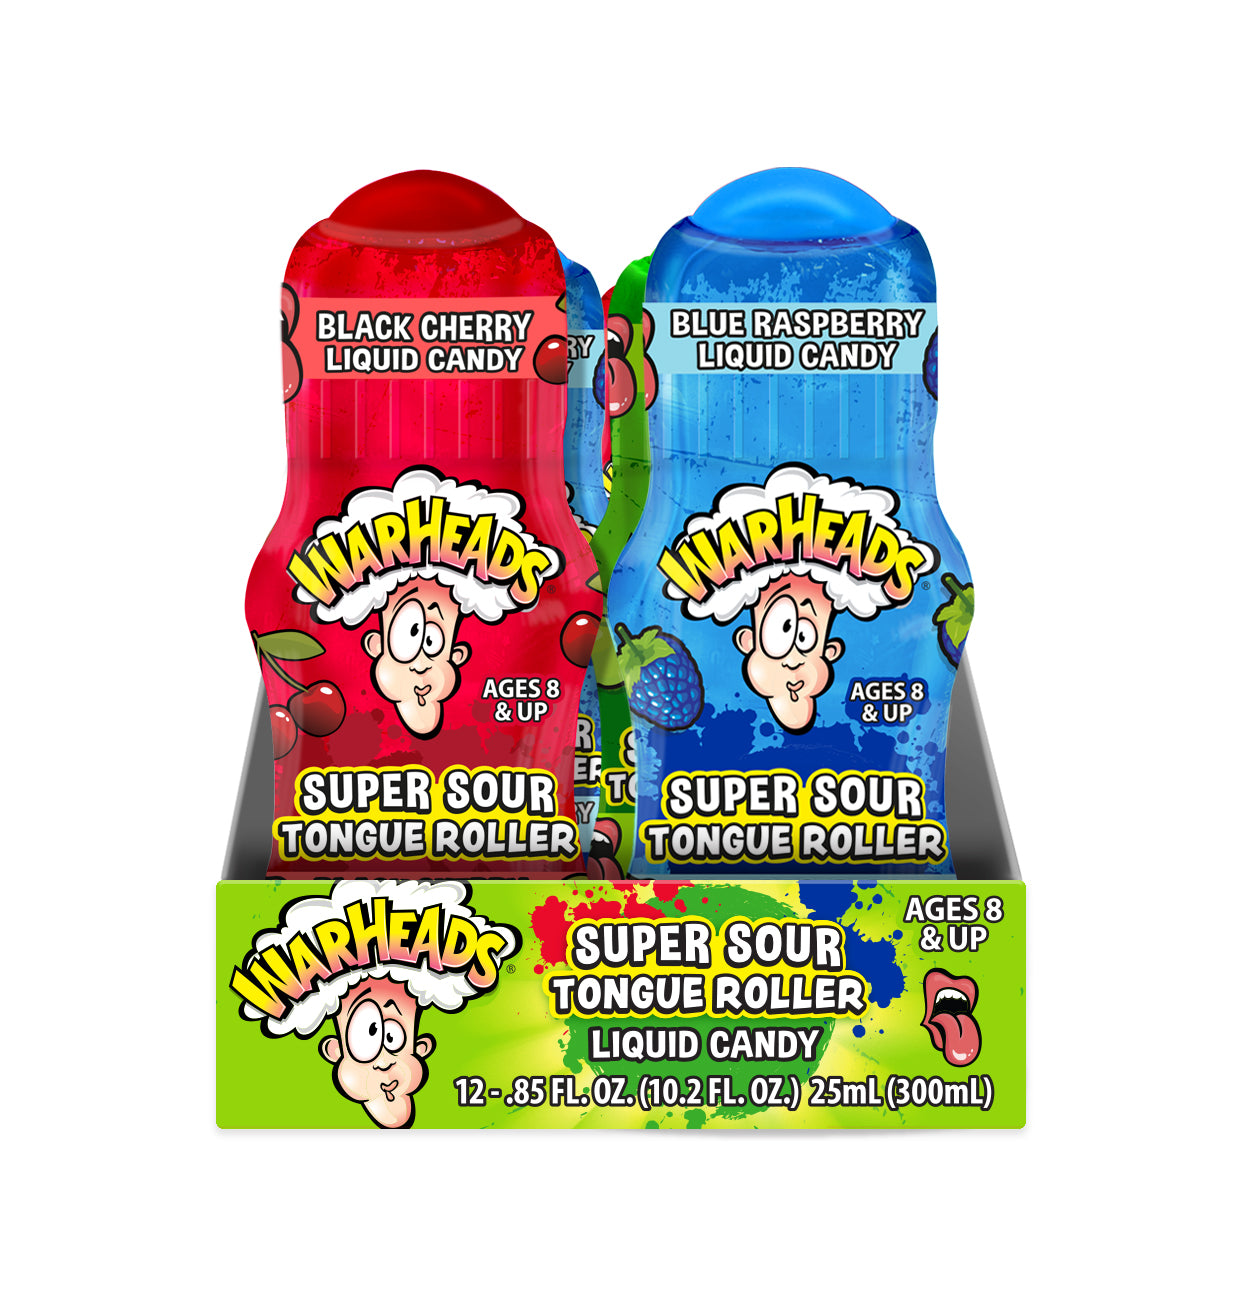 WARHEAD SUPER SOUR TONGUE ROLLERS